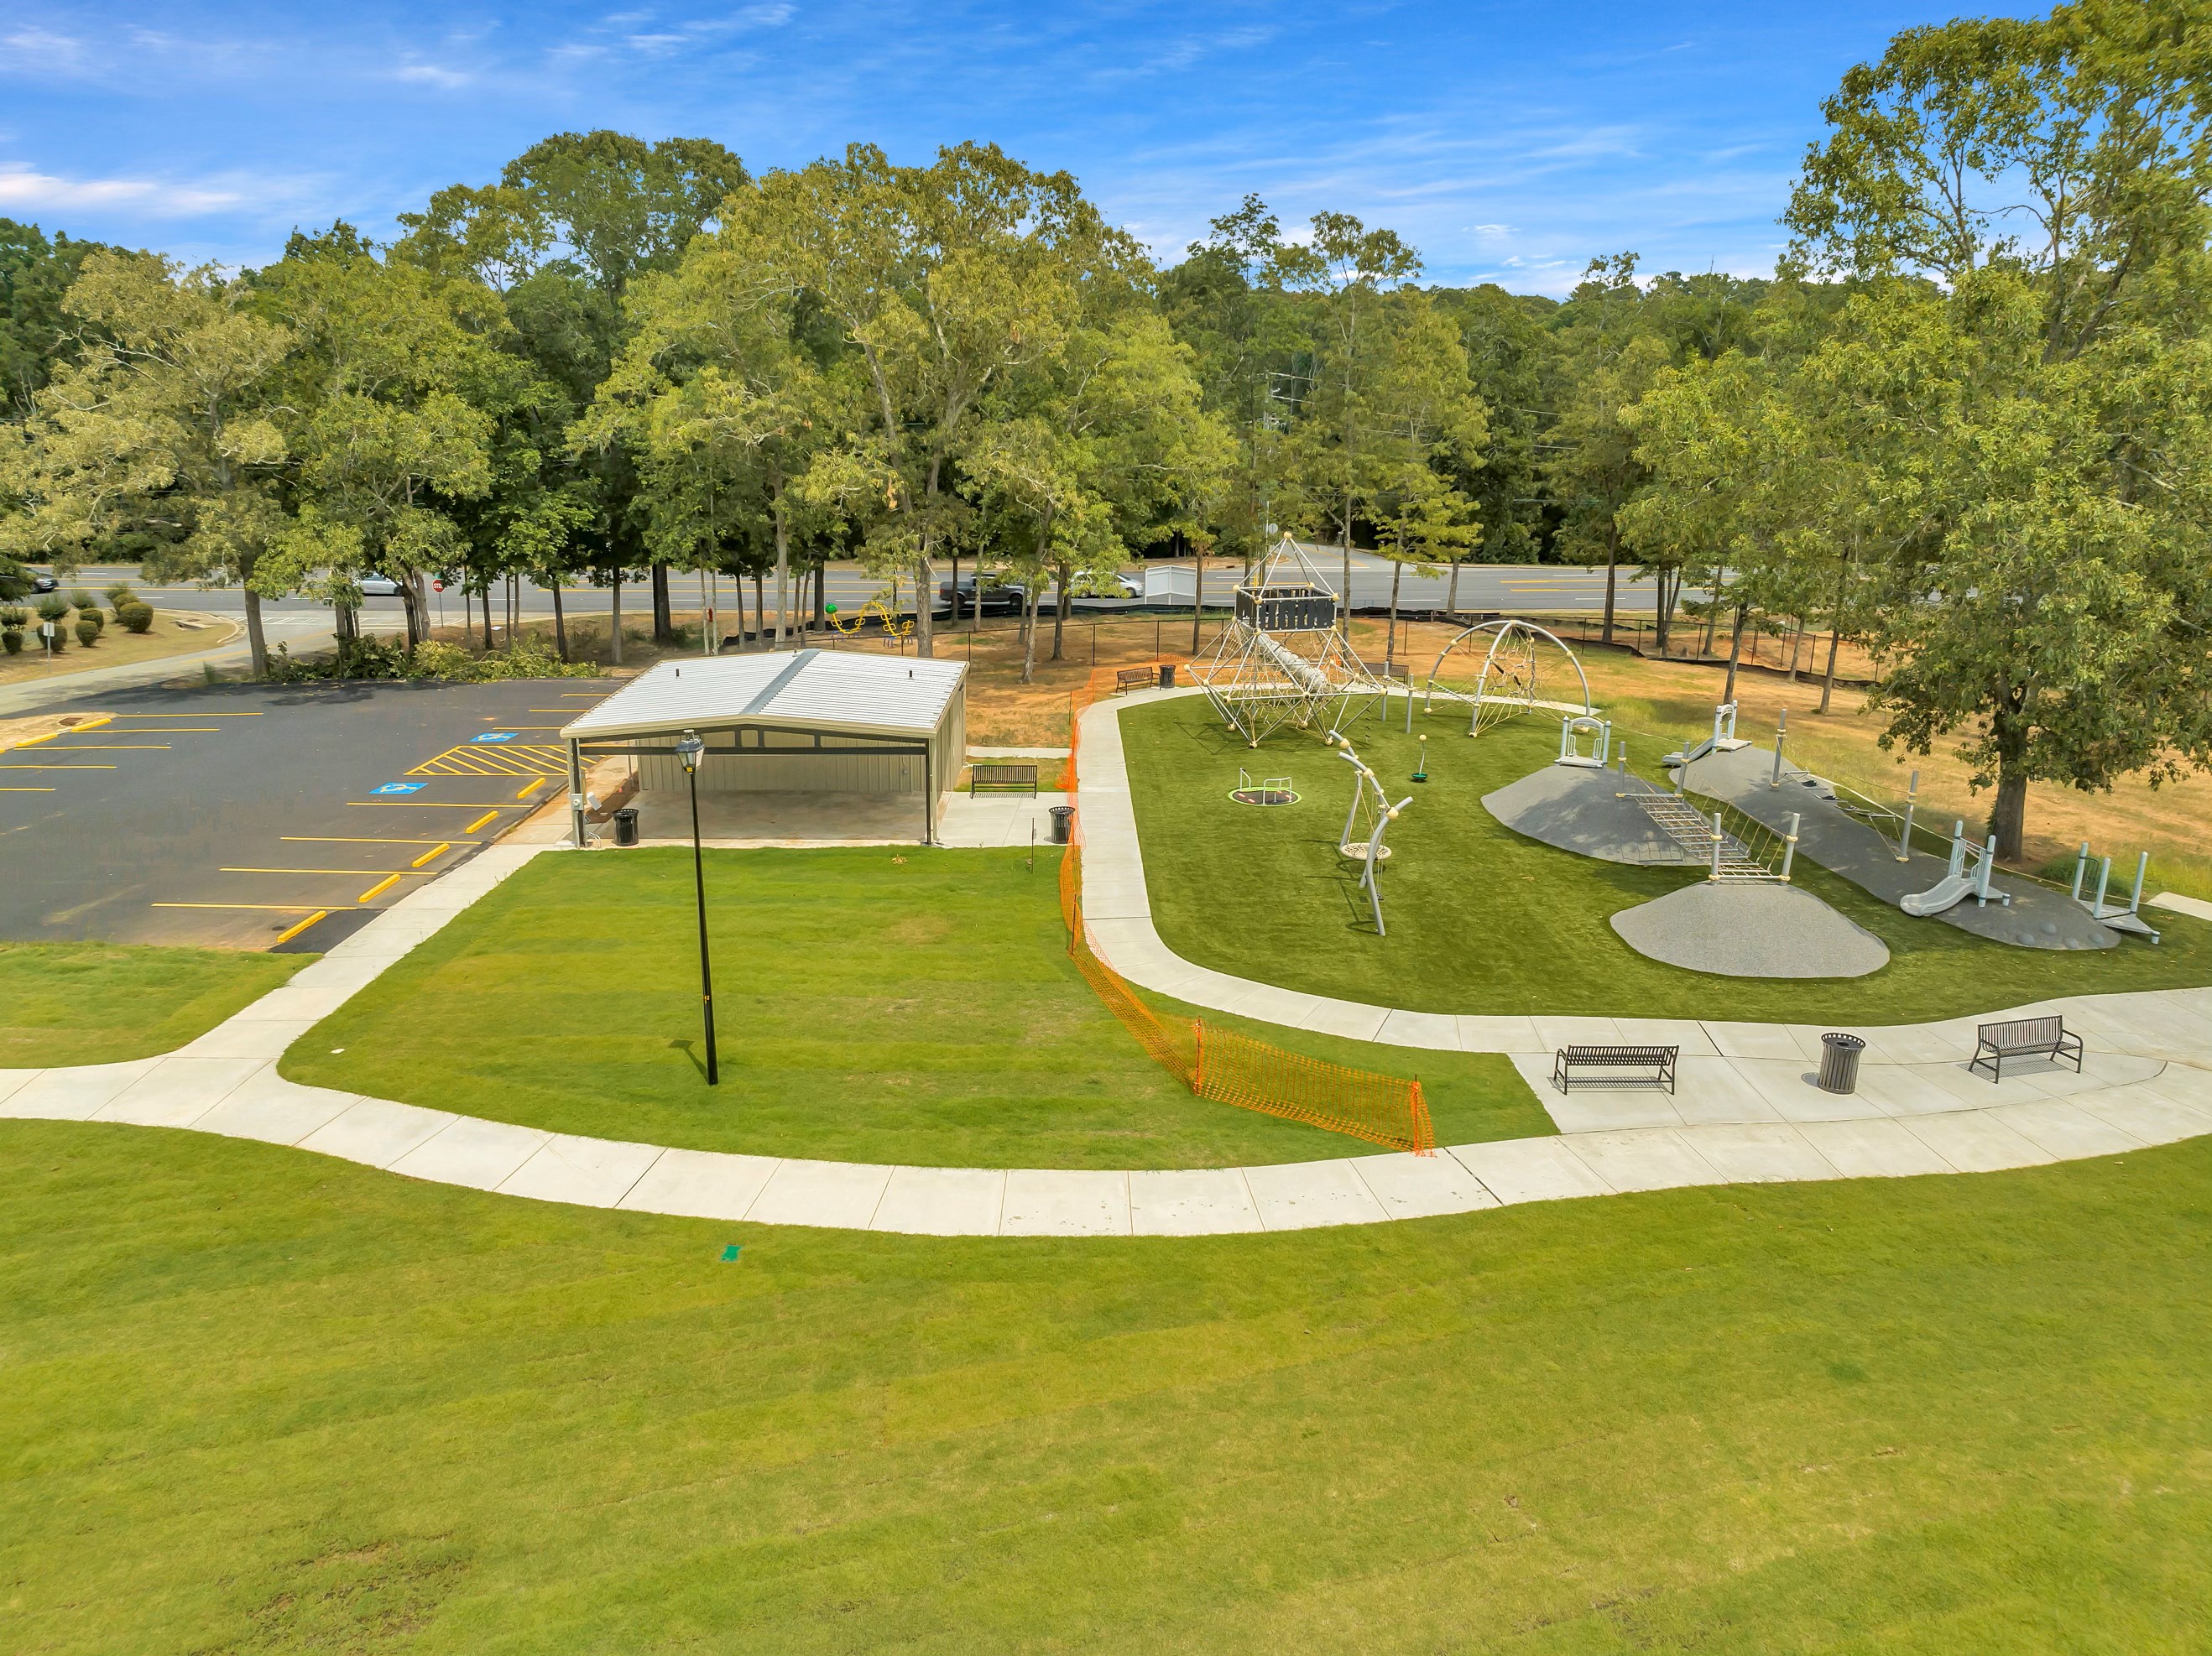 overhead view of playground and pavilion